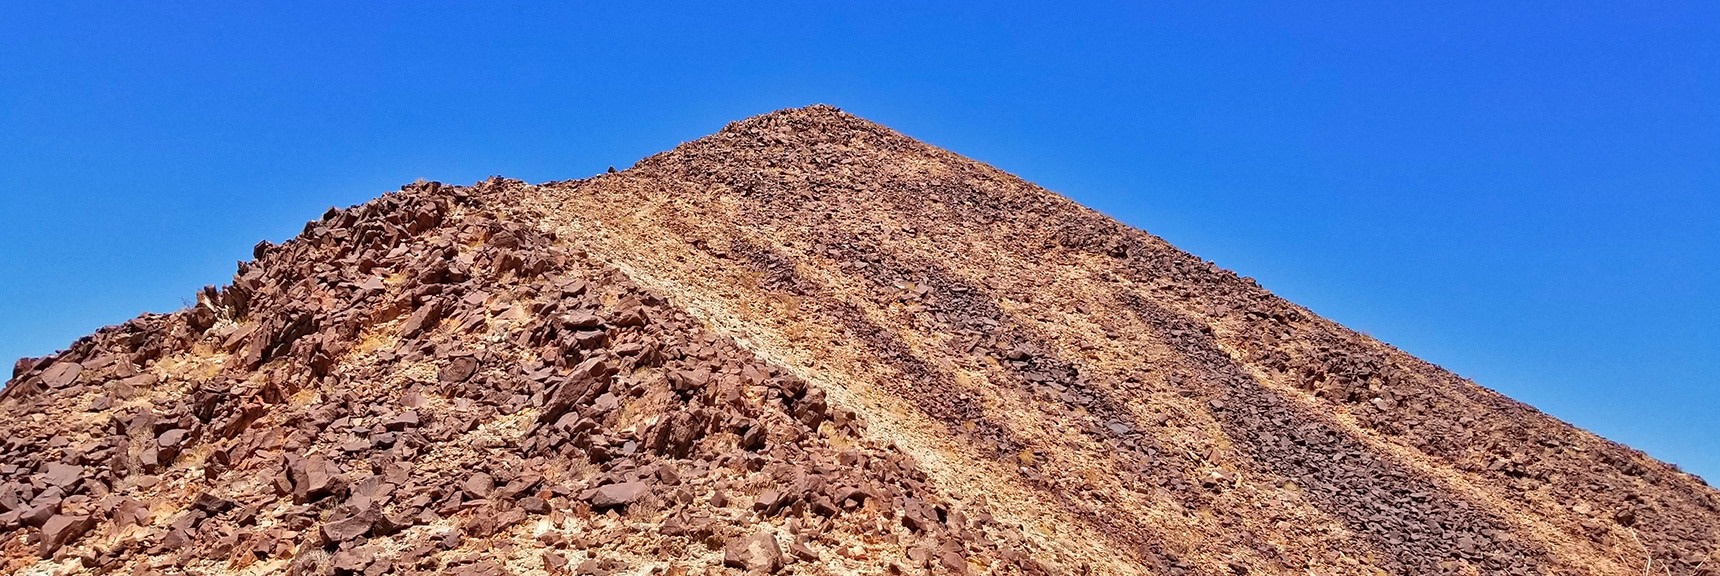 View Back up the South Ridge from Midway Down | Lava Butte | Lake Mead National Recreation Area, Nevada